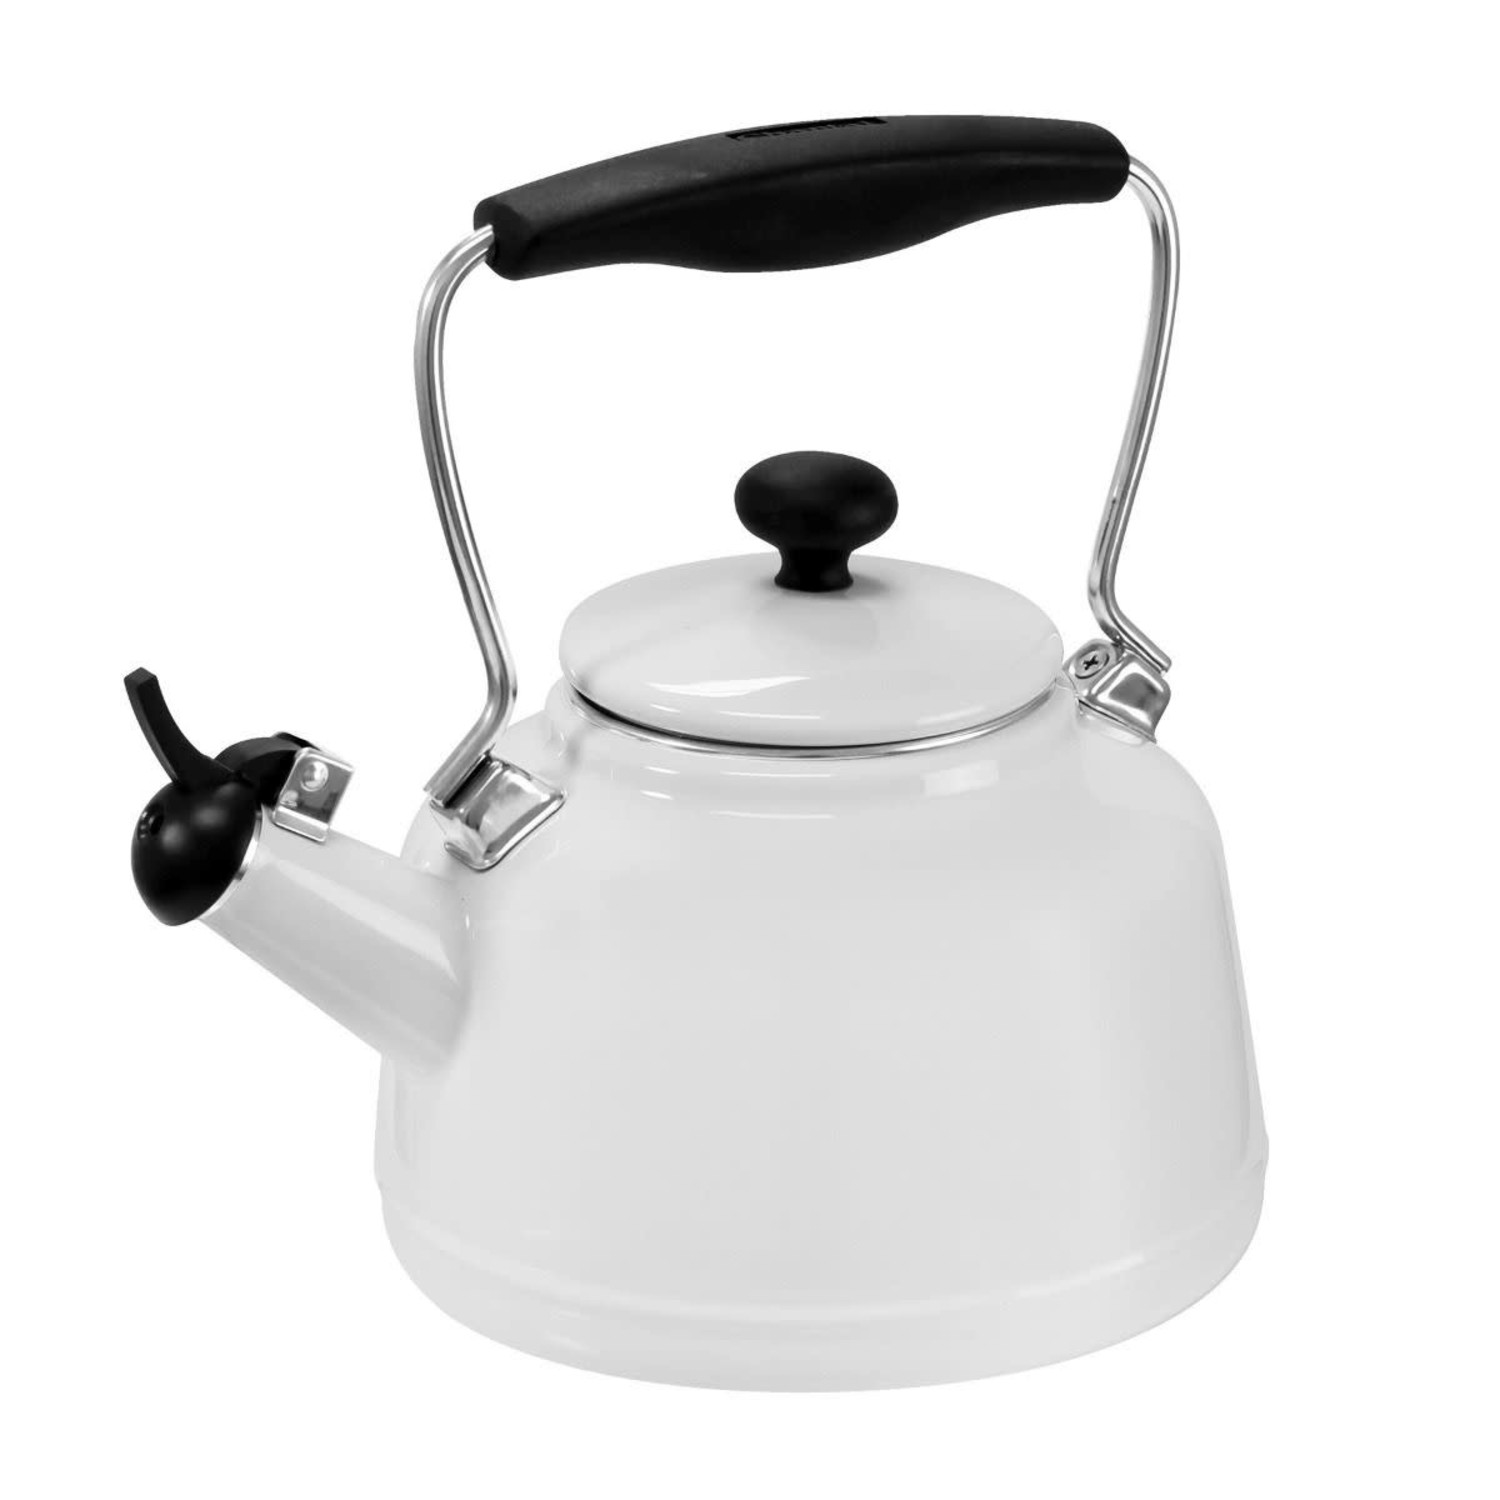 OXO Good Grips 1.7 qt Classic Tea Kettle, Brushed Stainless Steel